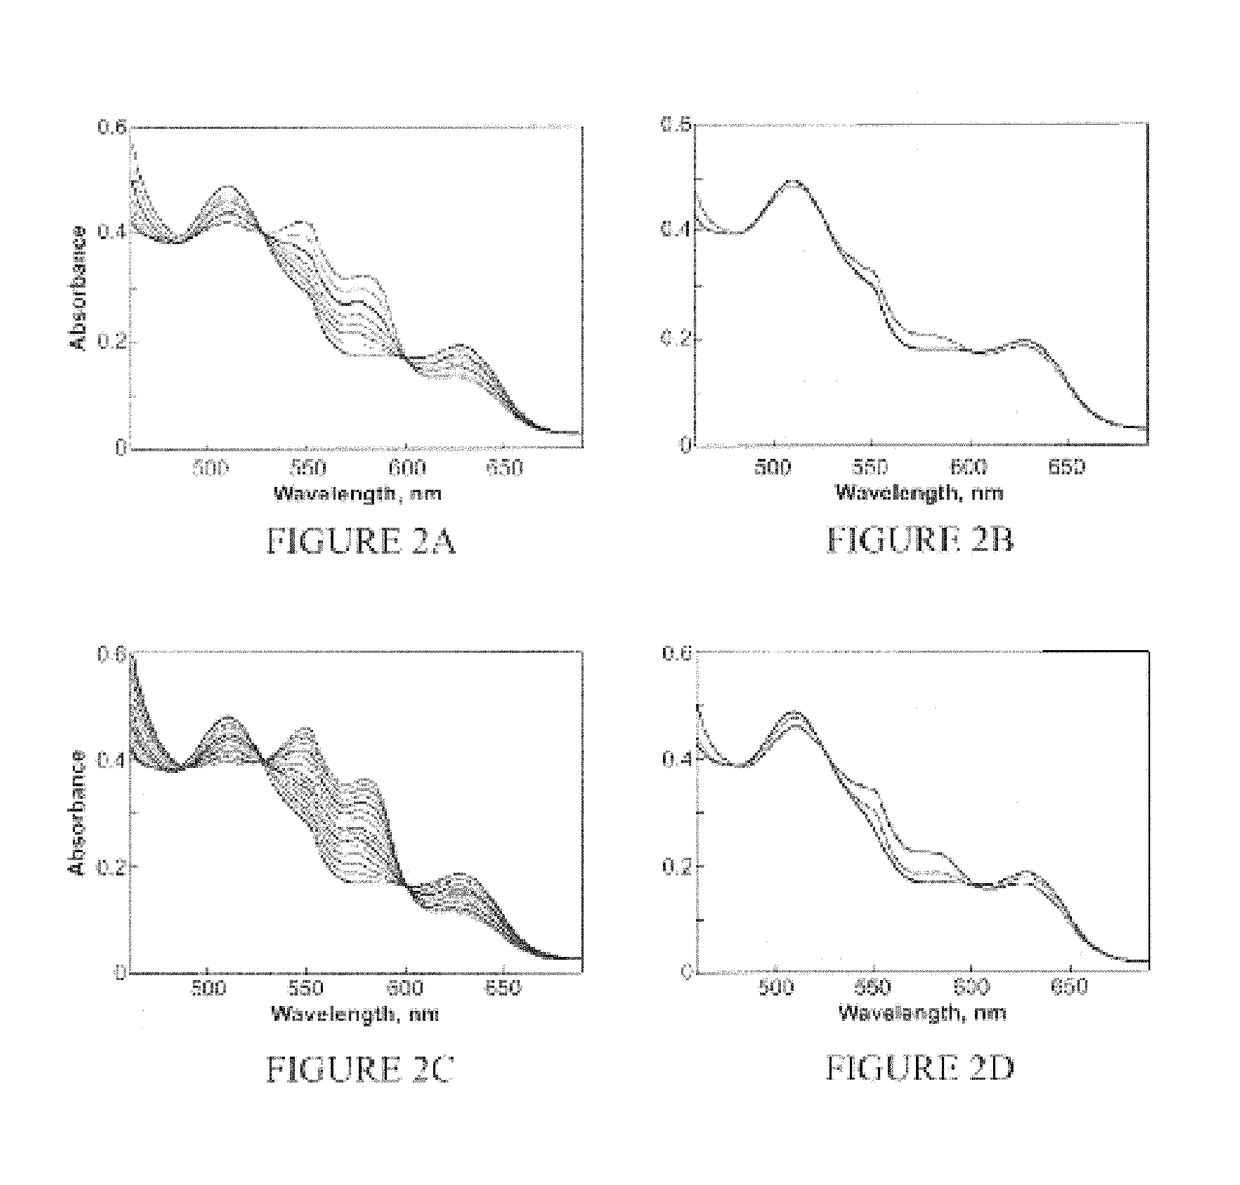 Compositions and methods of diazeniumdiolate-based prodrugs for treating cancer